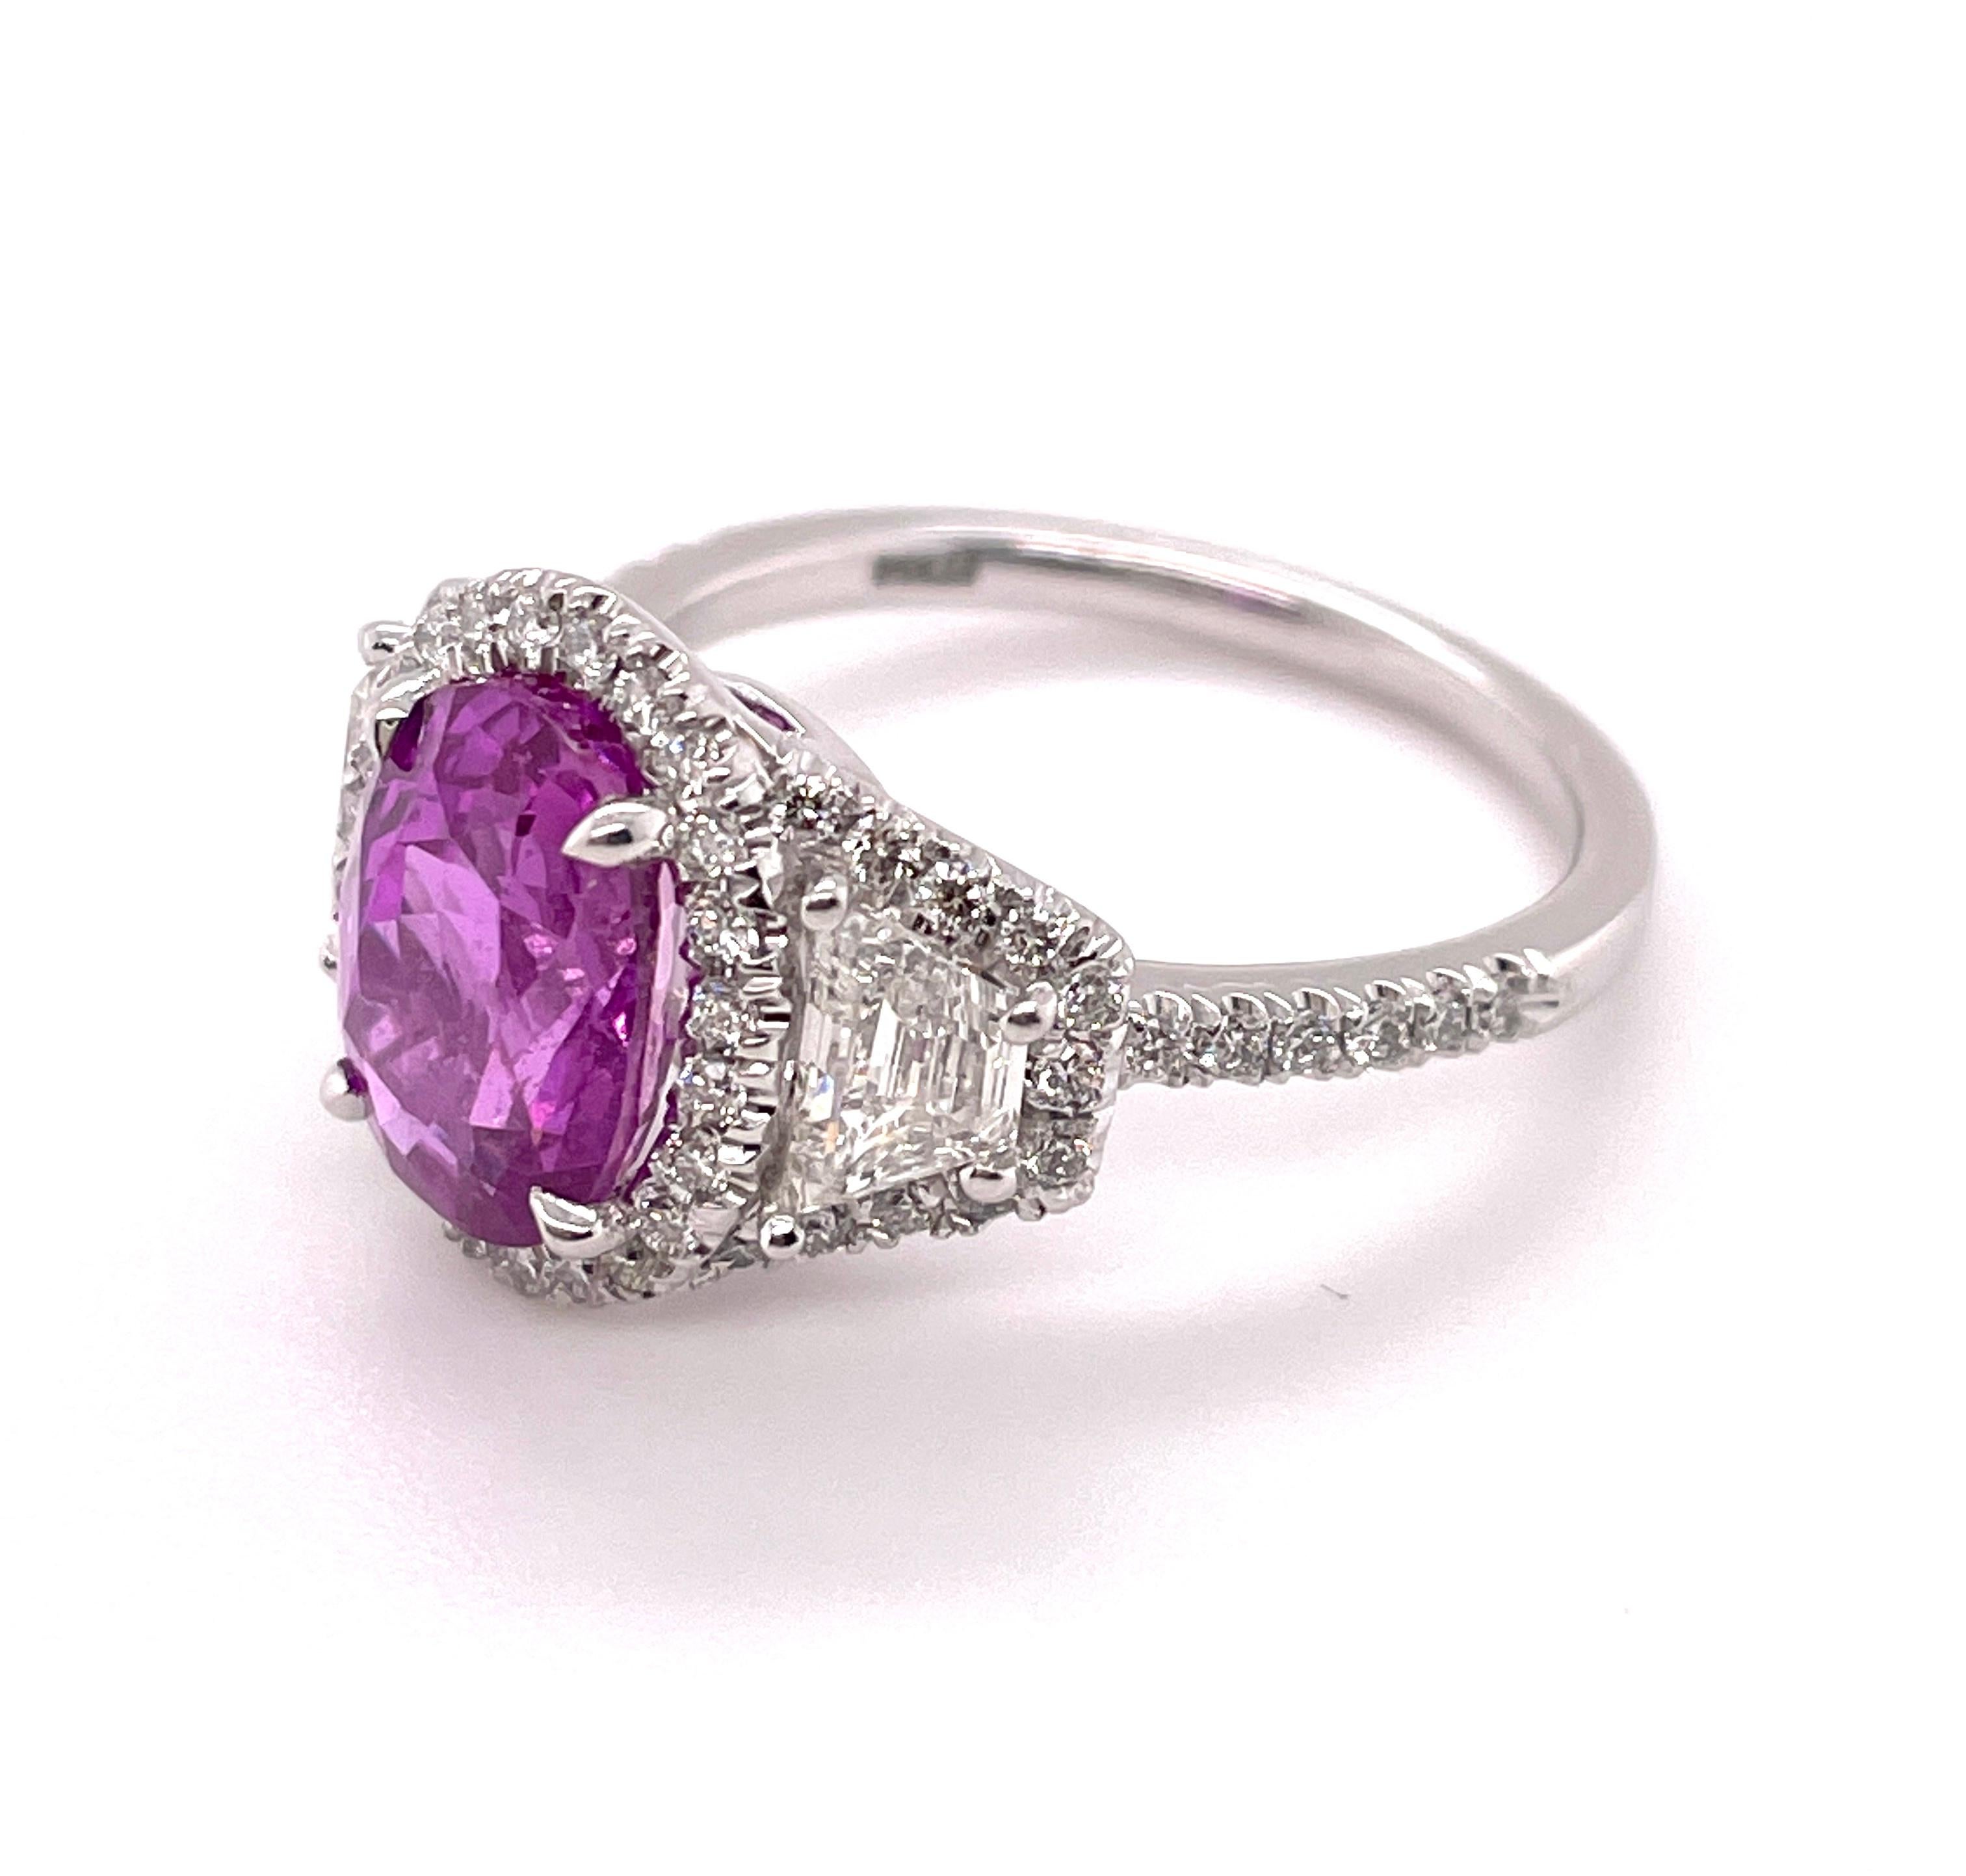 Modern Unheated GIA Certified 3.51ct Oval Pink Sapphire & Diamonds Ring For Sale